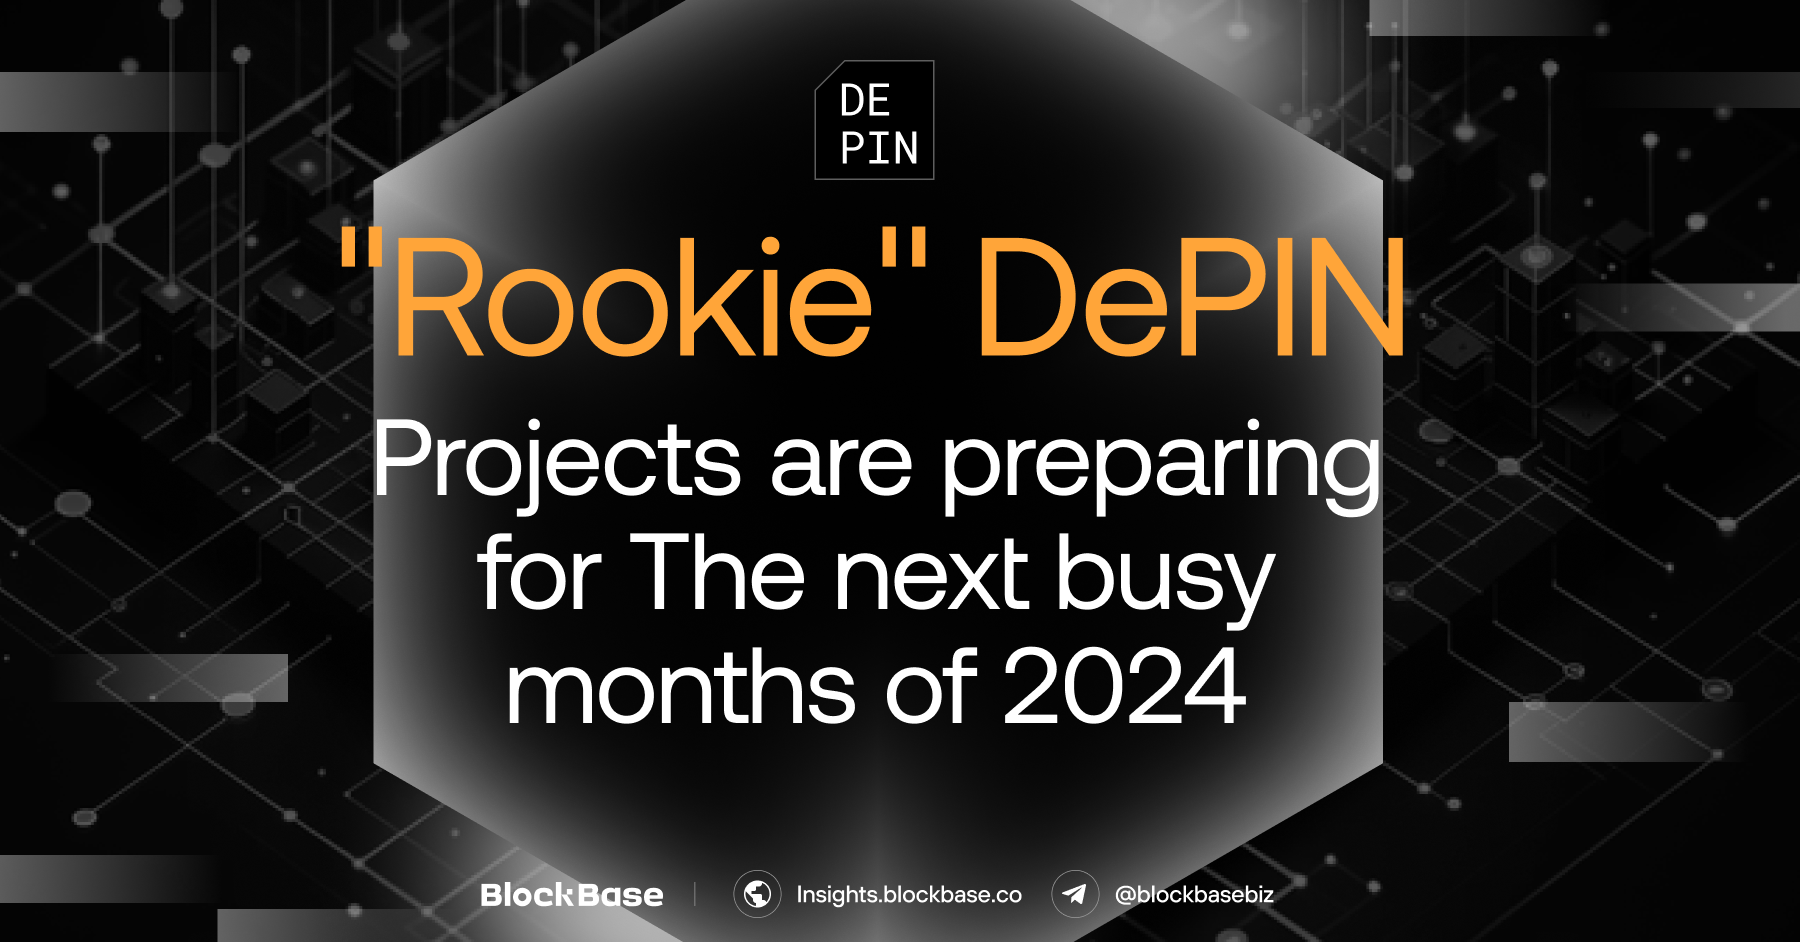 “Rookie” DePIN projects are preparing for the next busy months of 2024